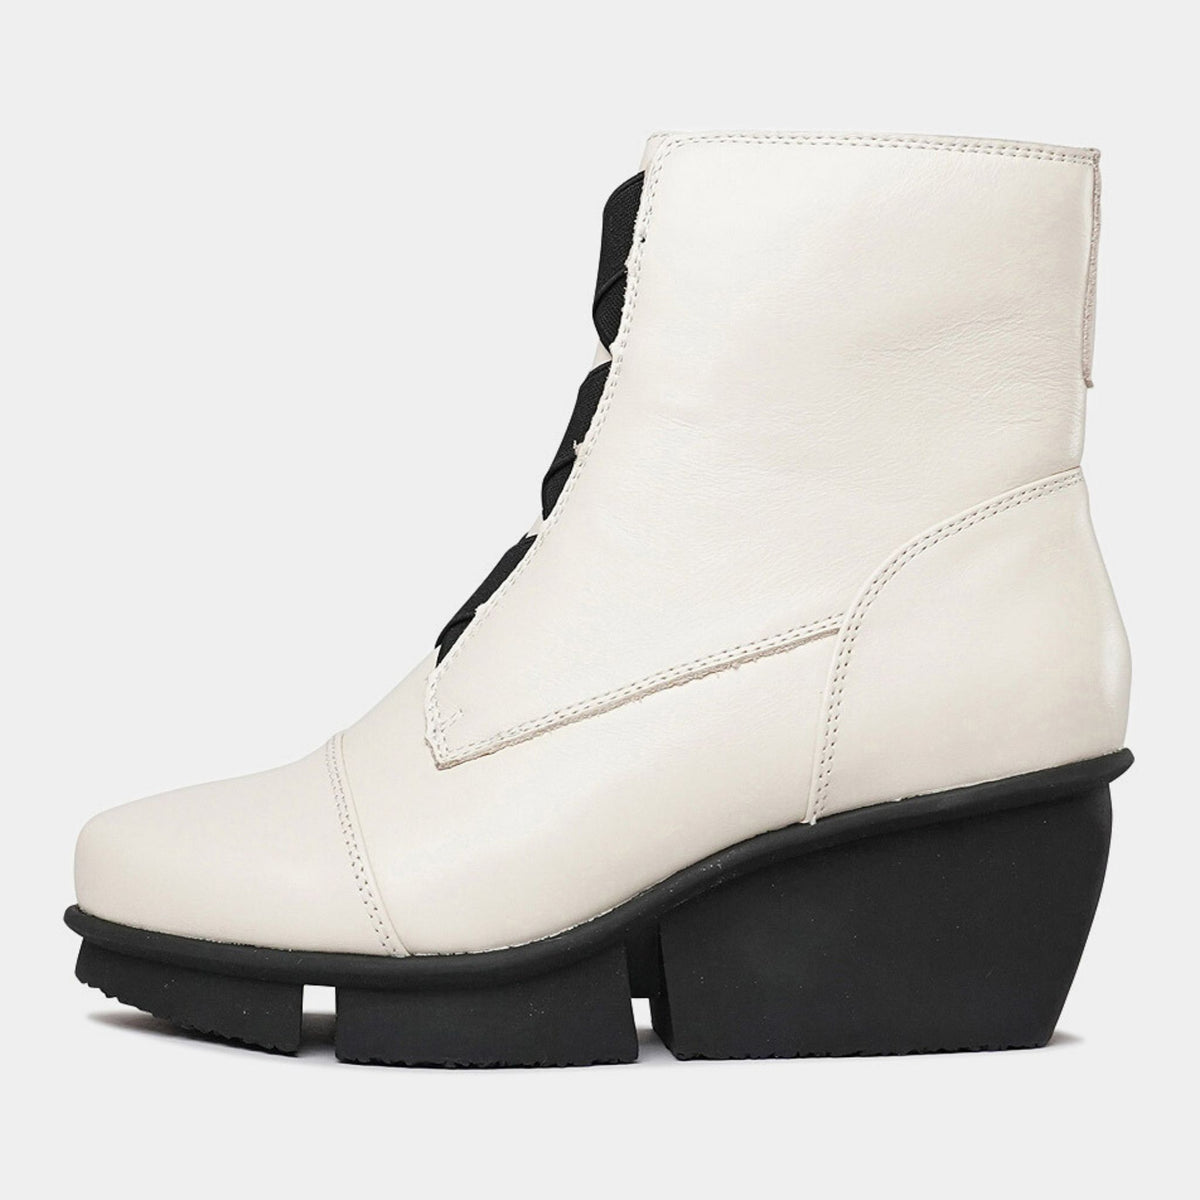 Orient Cream Leather Wedge Boots